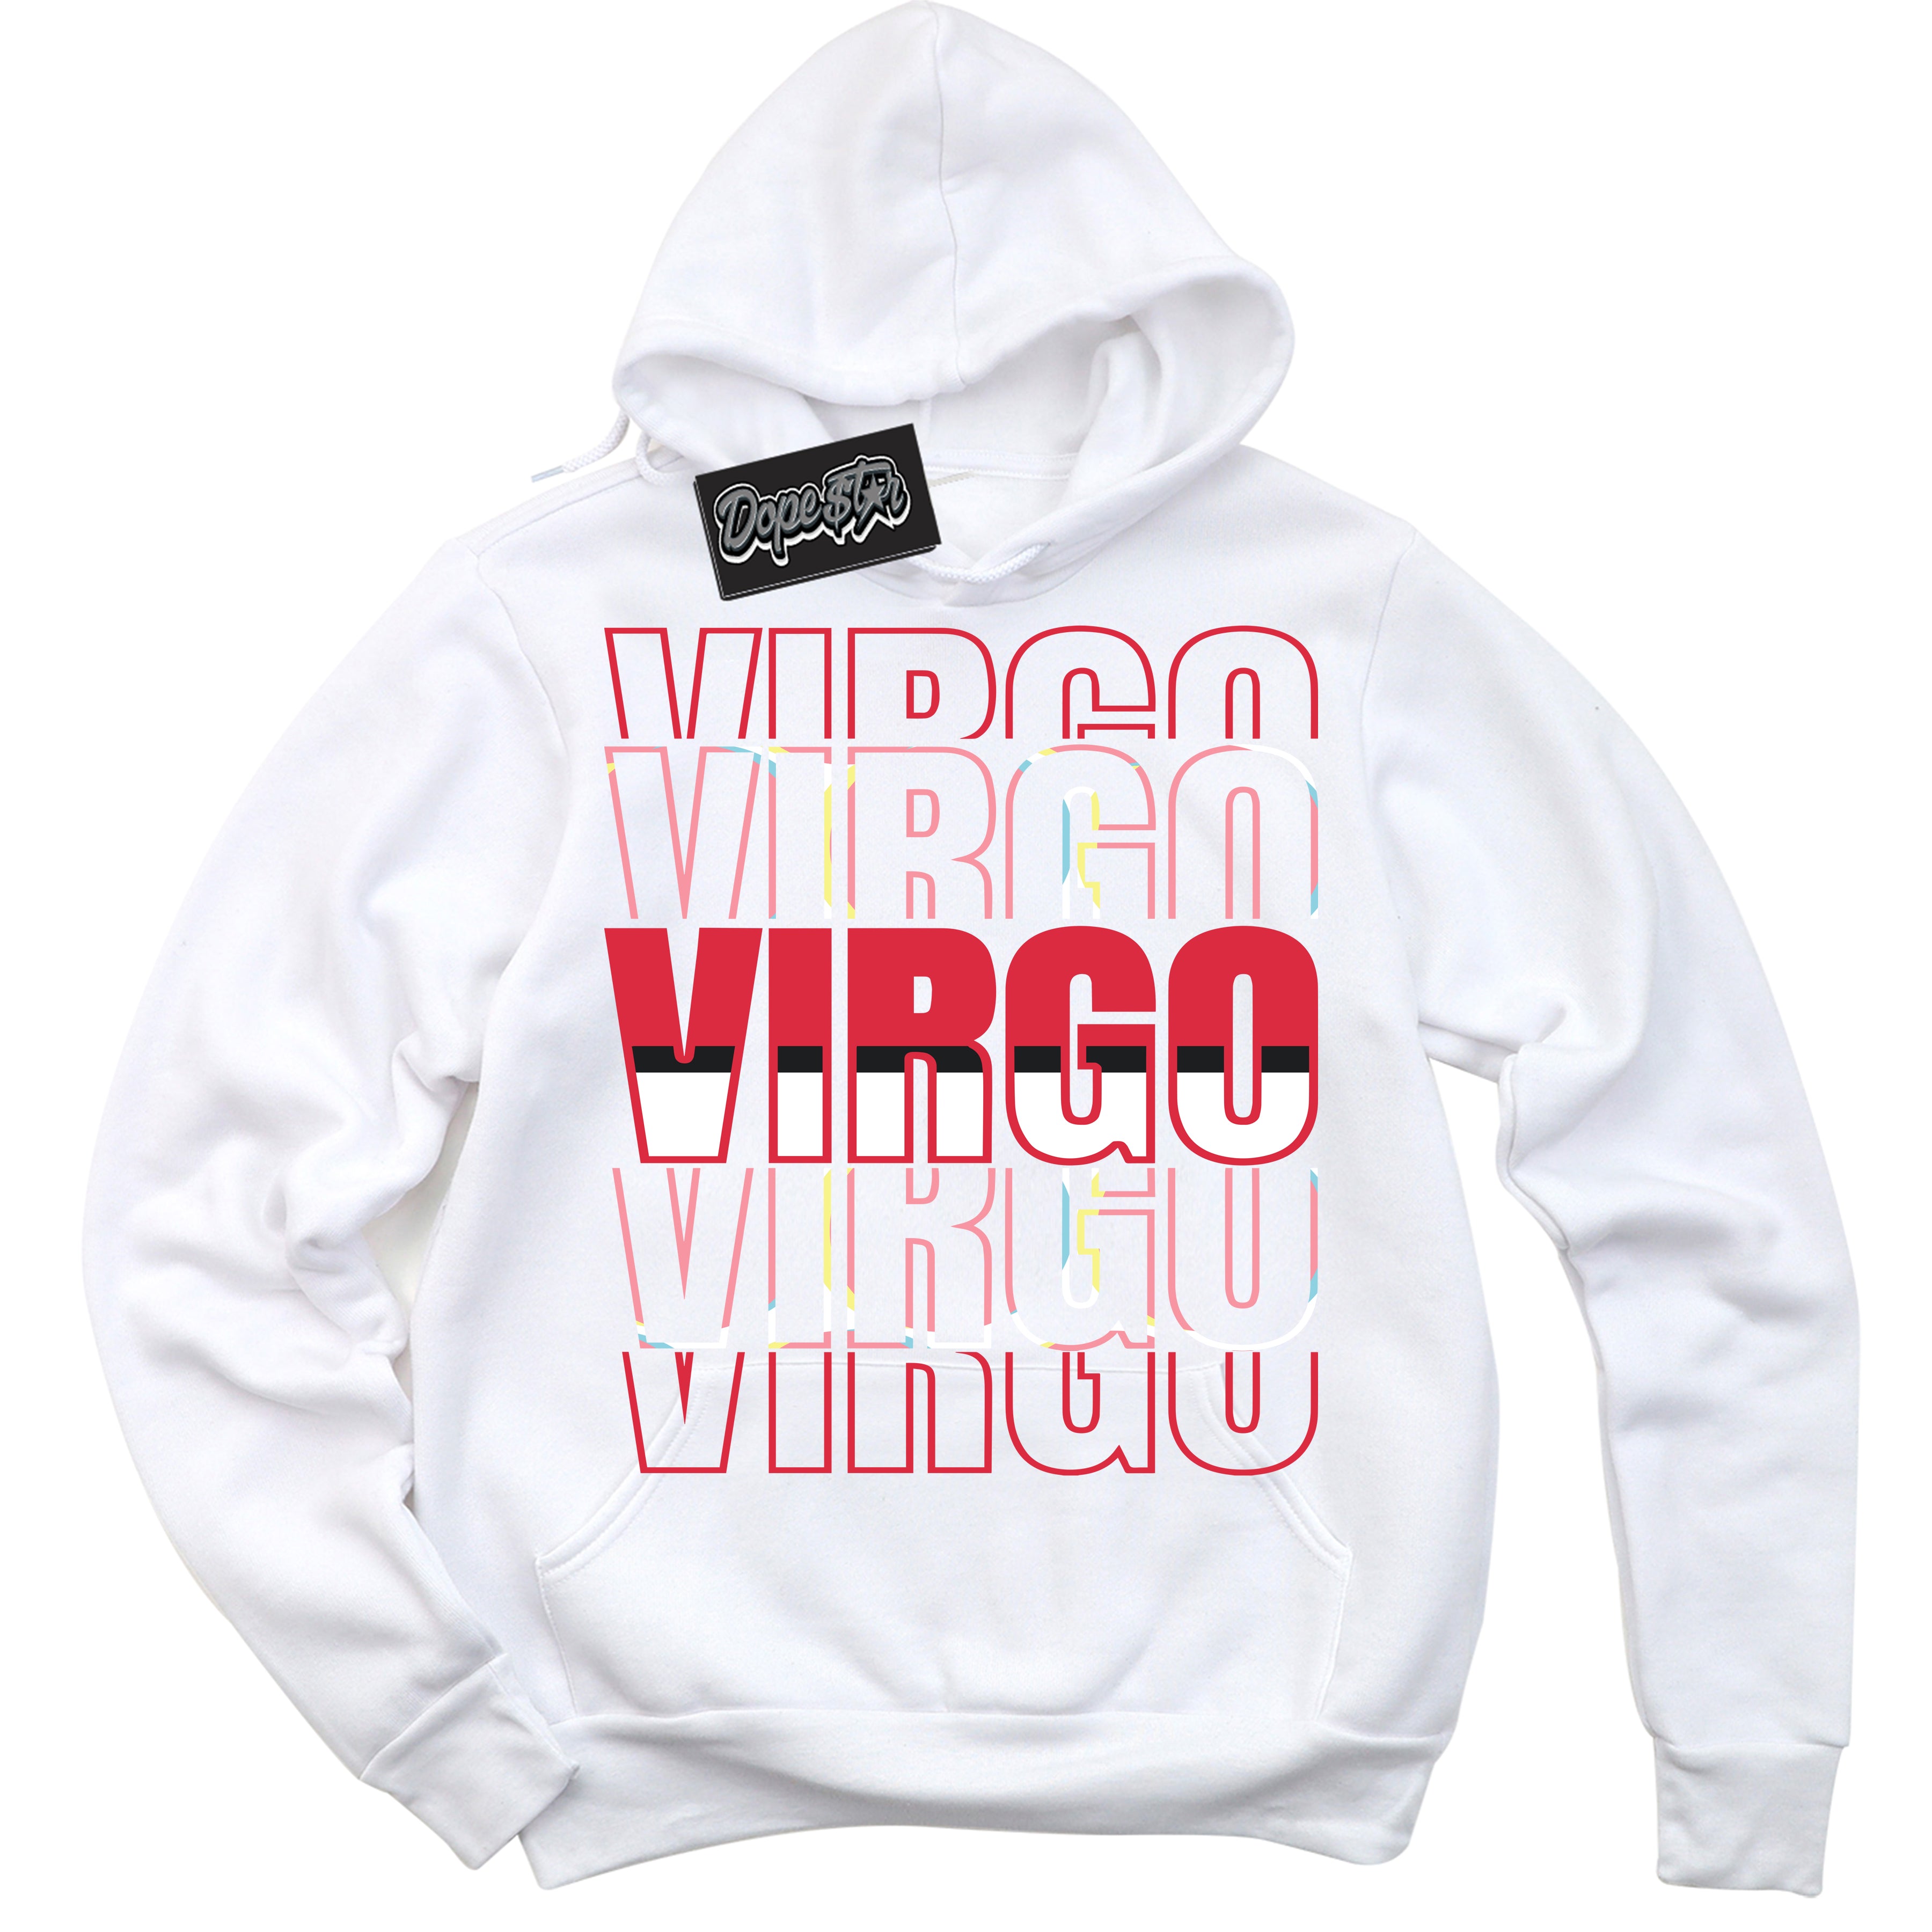 Cool White Graphic DopeStar Hoodie with “ Virgo “ print, that perfectly matches Spider-Verse 1s sneakers